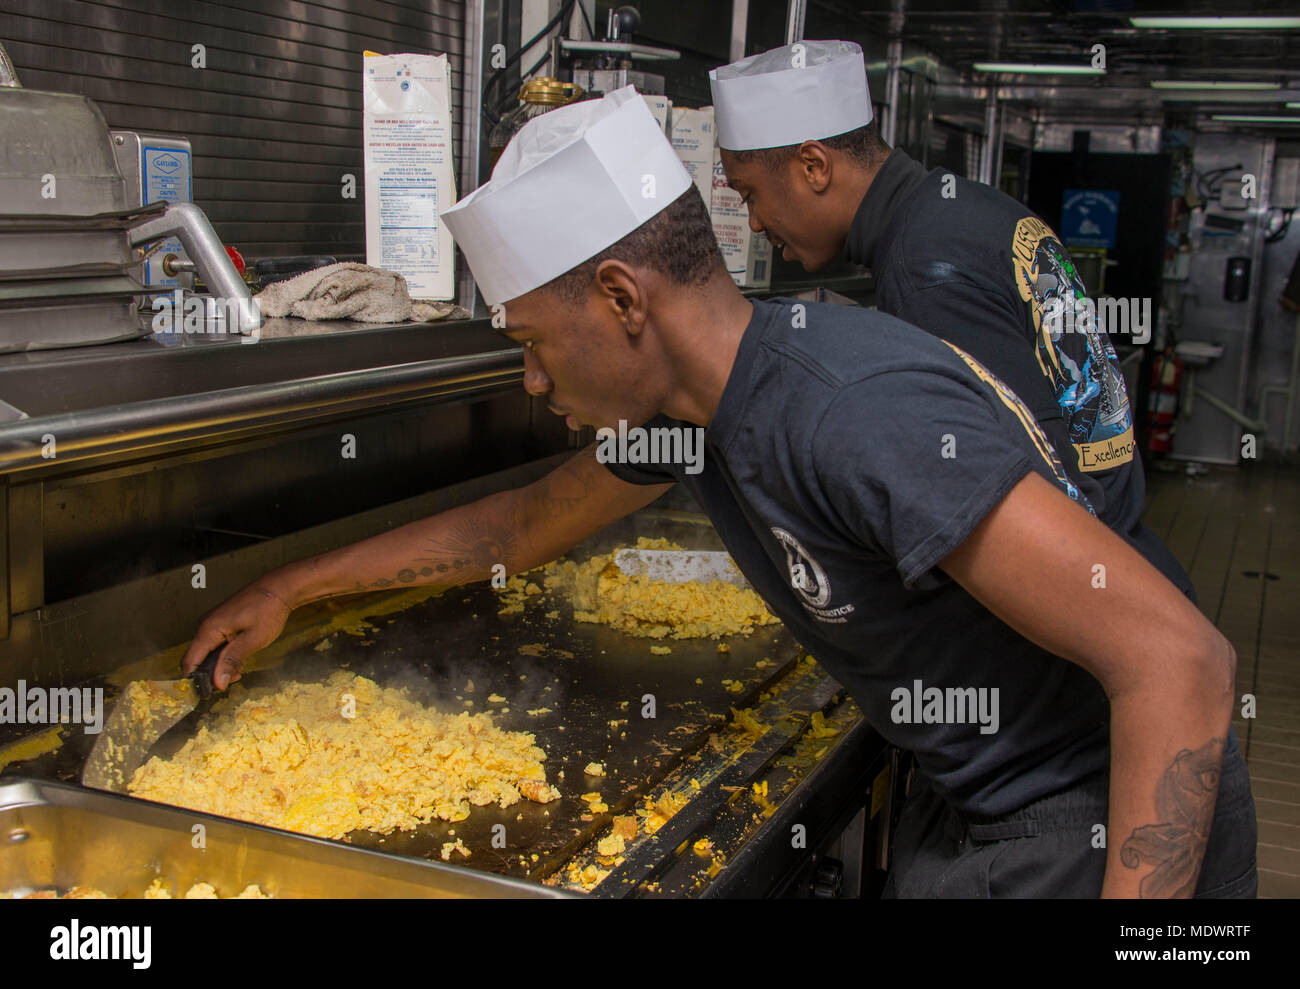 ATLANTIC OCEAN (Dec. 9, 2017) Culinary Specialist Seaman Raekwon Barksdale, front, from Houston, Texas and Culinary Specialist Seaman Apprentice Dante Herron, rear, from Detroit, Michigan prepare scrambled eggs on the grill in the galley of the amphibious assault ship USS Iwo Jima (LHD 7). Iwo Jima, components of the Iwo Jima Amphibious Ready Group and the 26th MEU are conducting a Combined Composite Training Unit Exercise that is the culmination of training for the Navy-Marine Corps team and will certify them for deployment. (U.S. Navy photo by Mass Communication Specialist 3rd Class Kevin Le Stock Photo